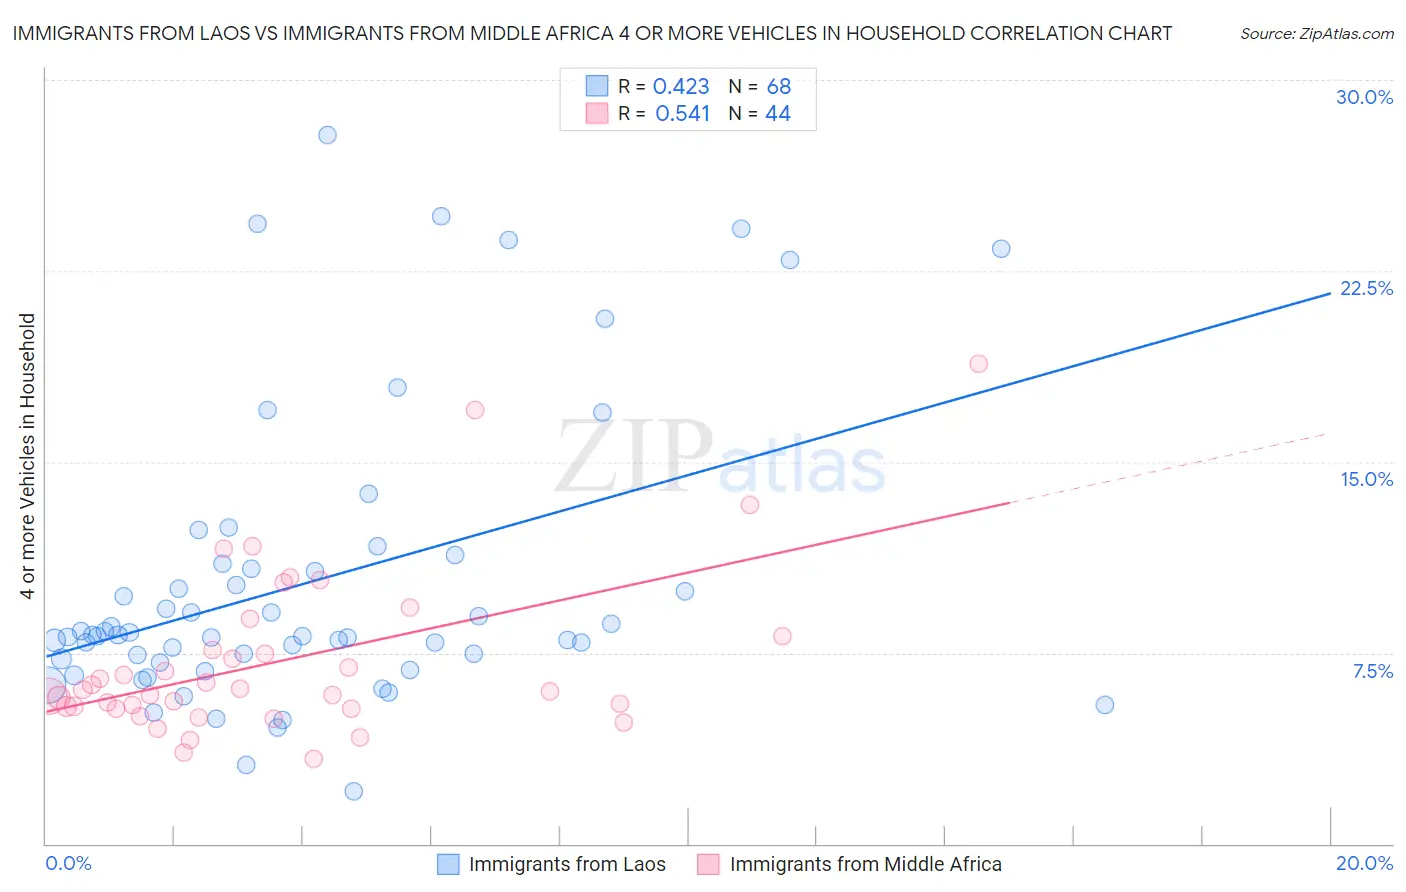 Immigrants from Laos vs Immigrants from Middle Africa 4 or more Vehicles in Household